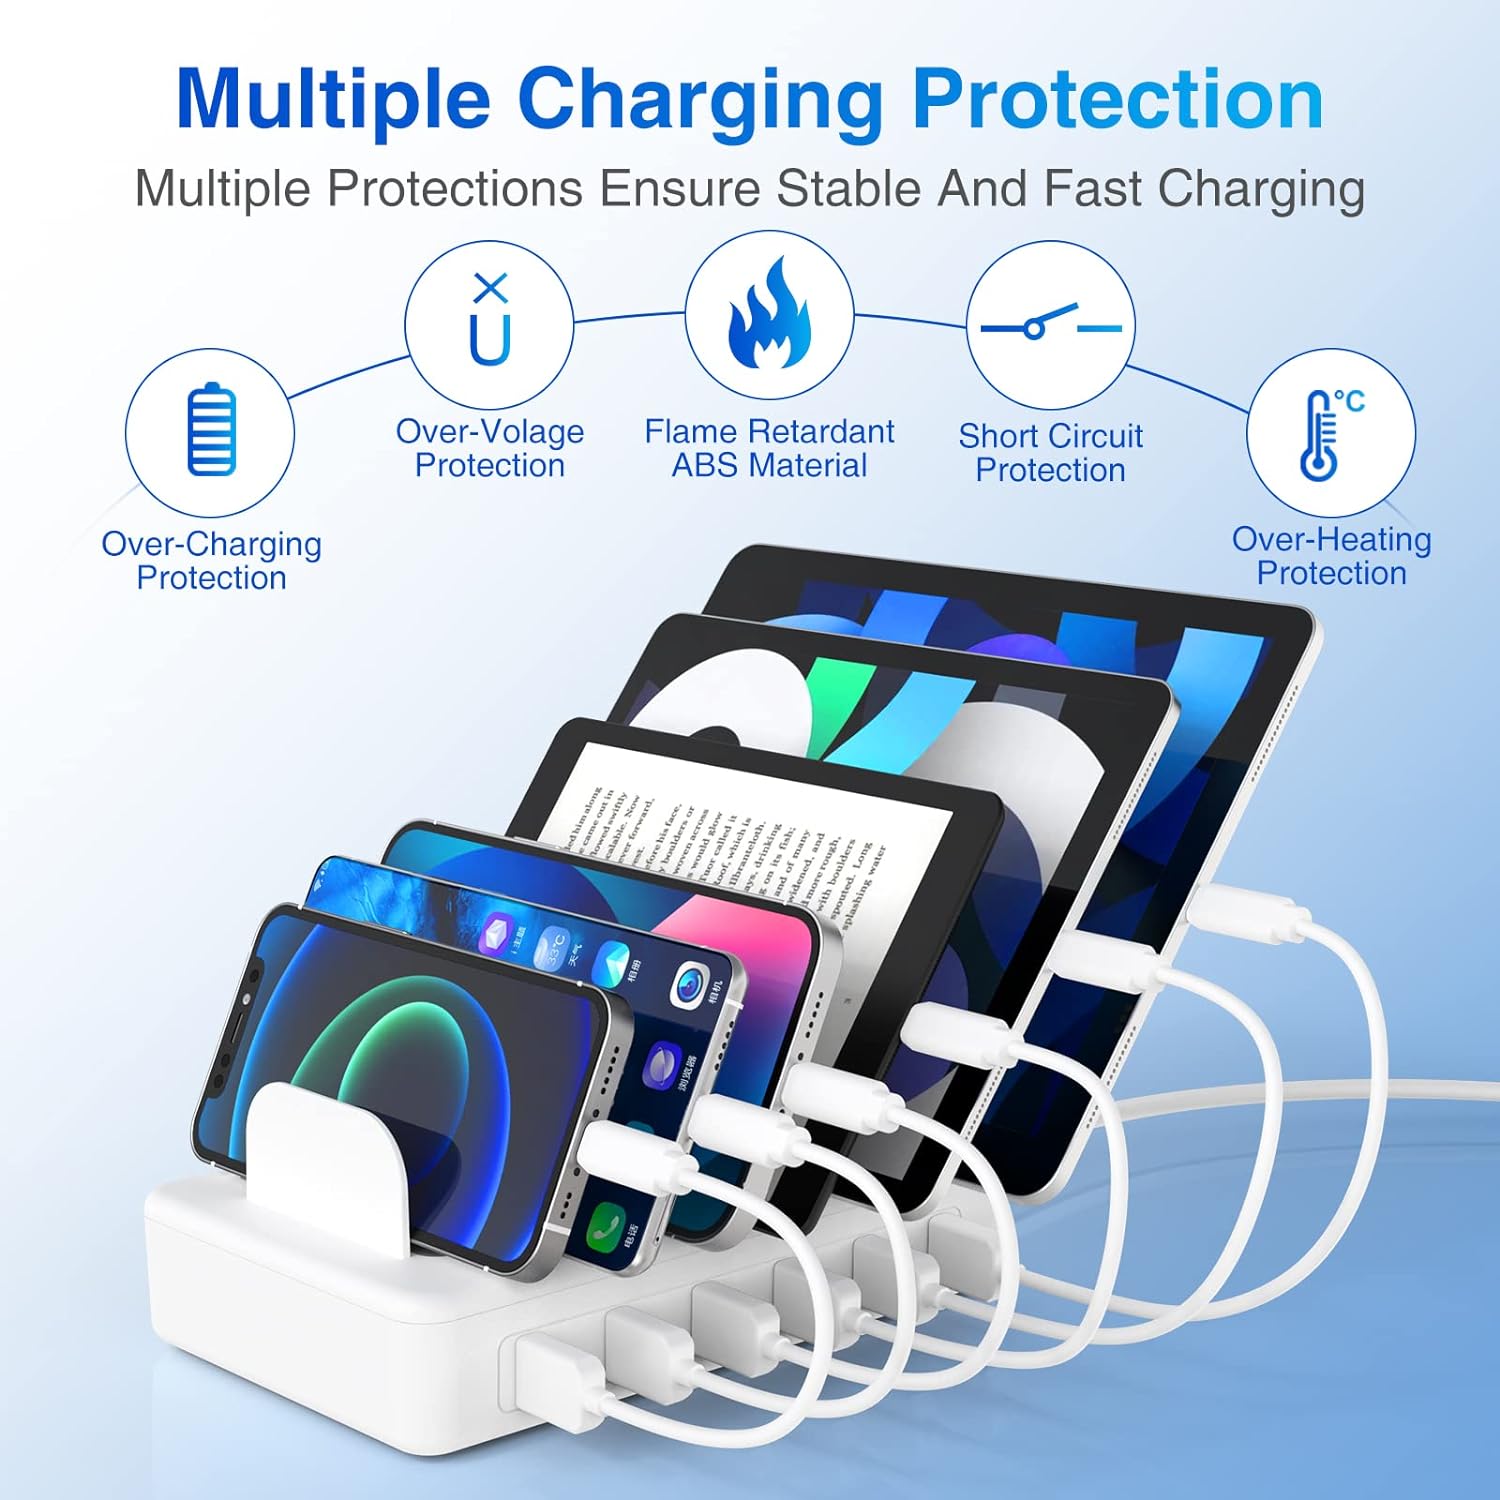 ZXSWONLY Charging Station for Multiple Devices, 50W 6 Ports USB Charging Station Organizer with 6 Cables Compatible with Cellphone, Tablet, Kindle, and Other Electronic (White)